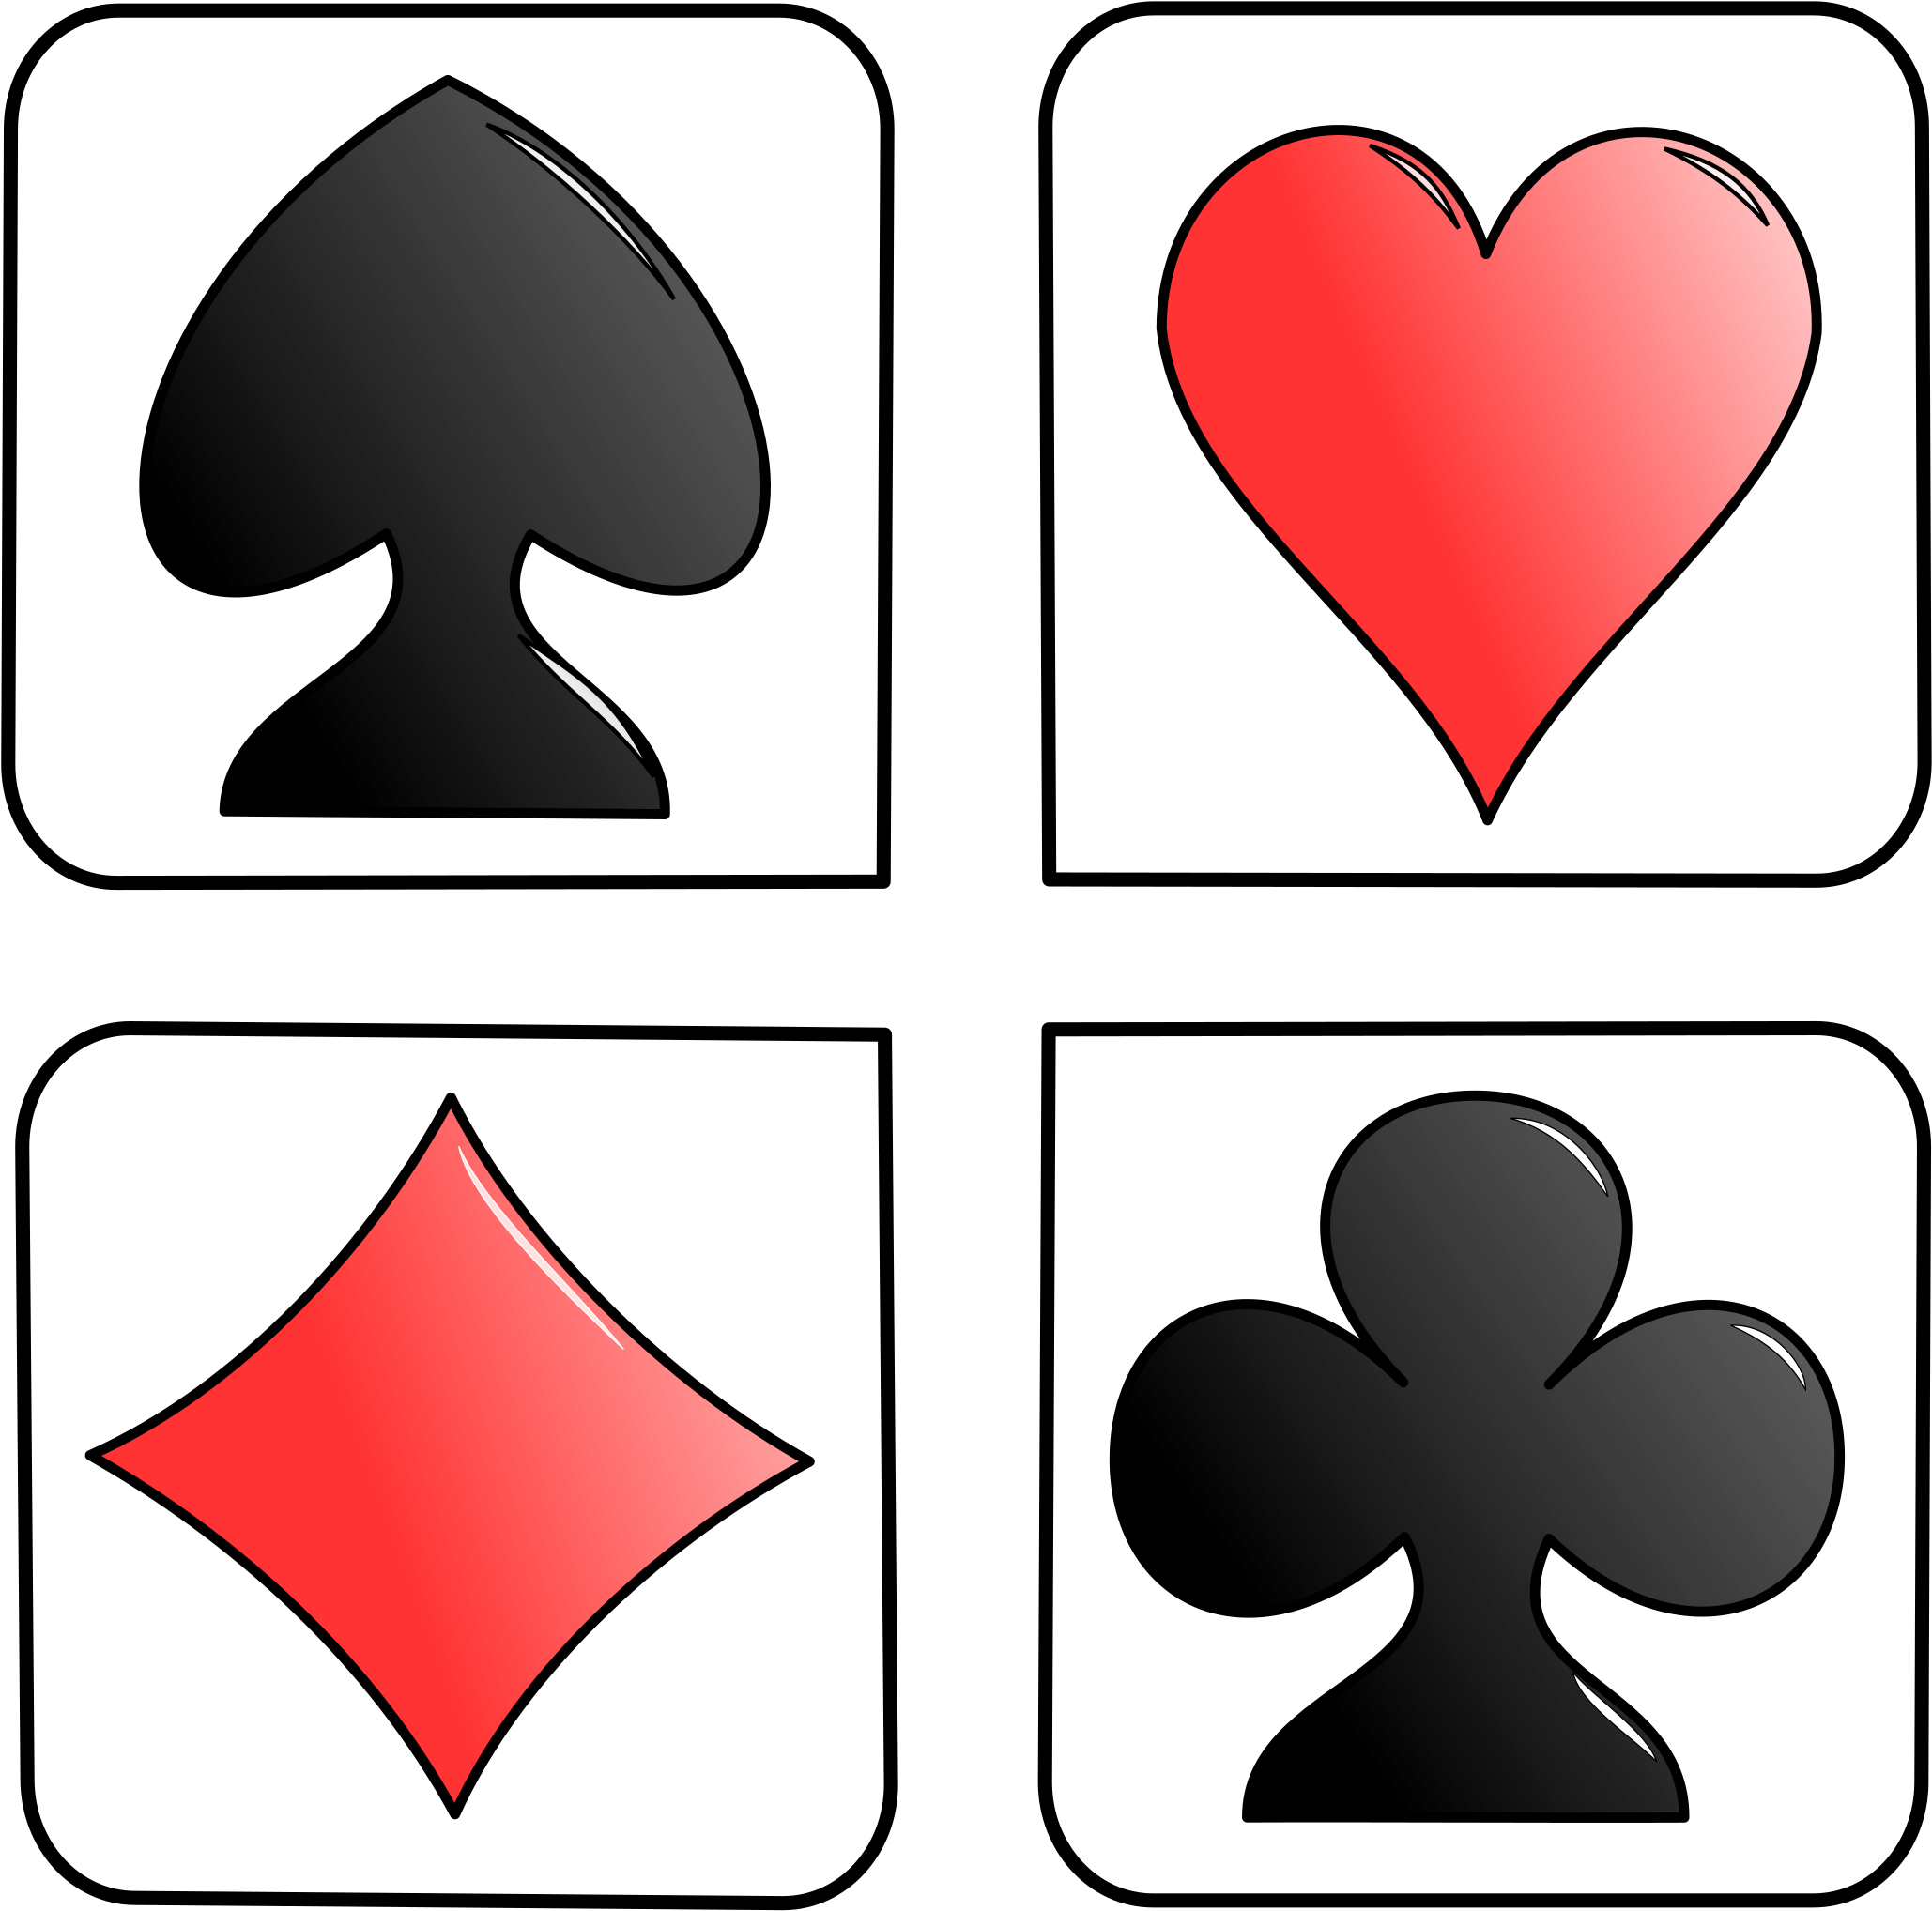 Cards Library Card Clipart Free Images 3 Image - Cards Hearts Diamonds Spades And Clubs (2400x2400)